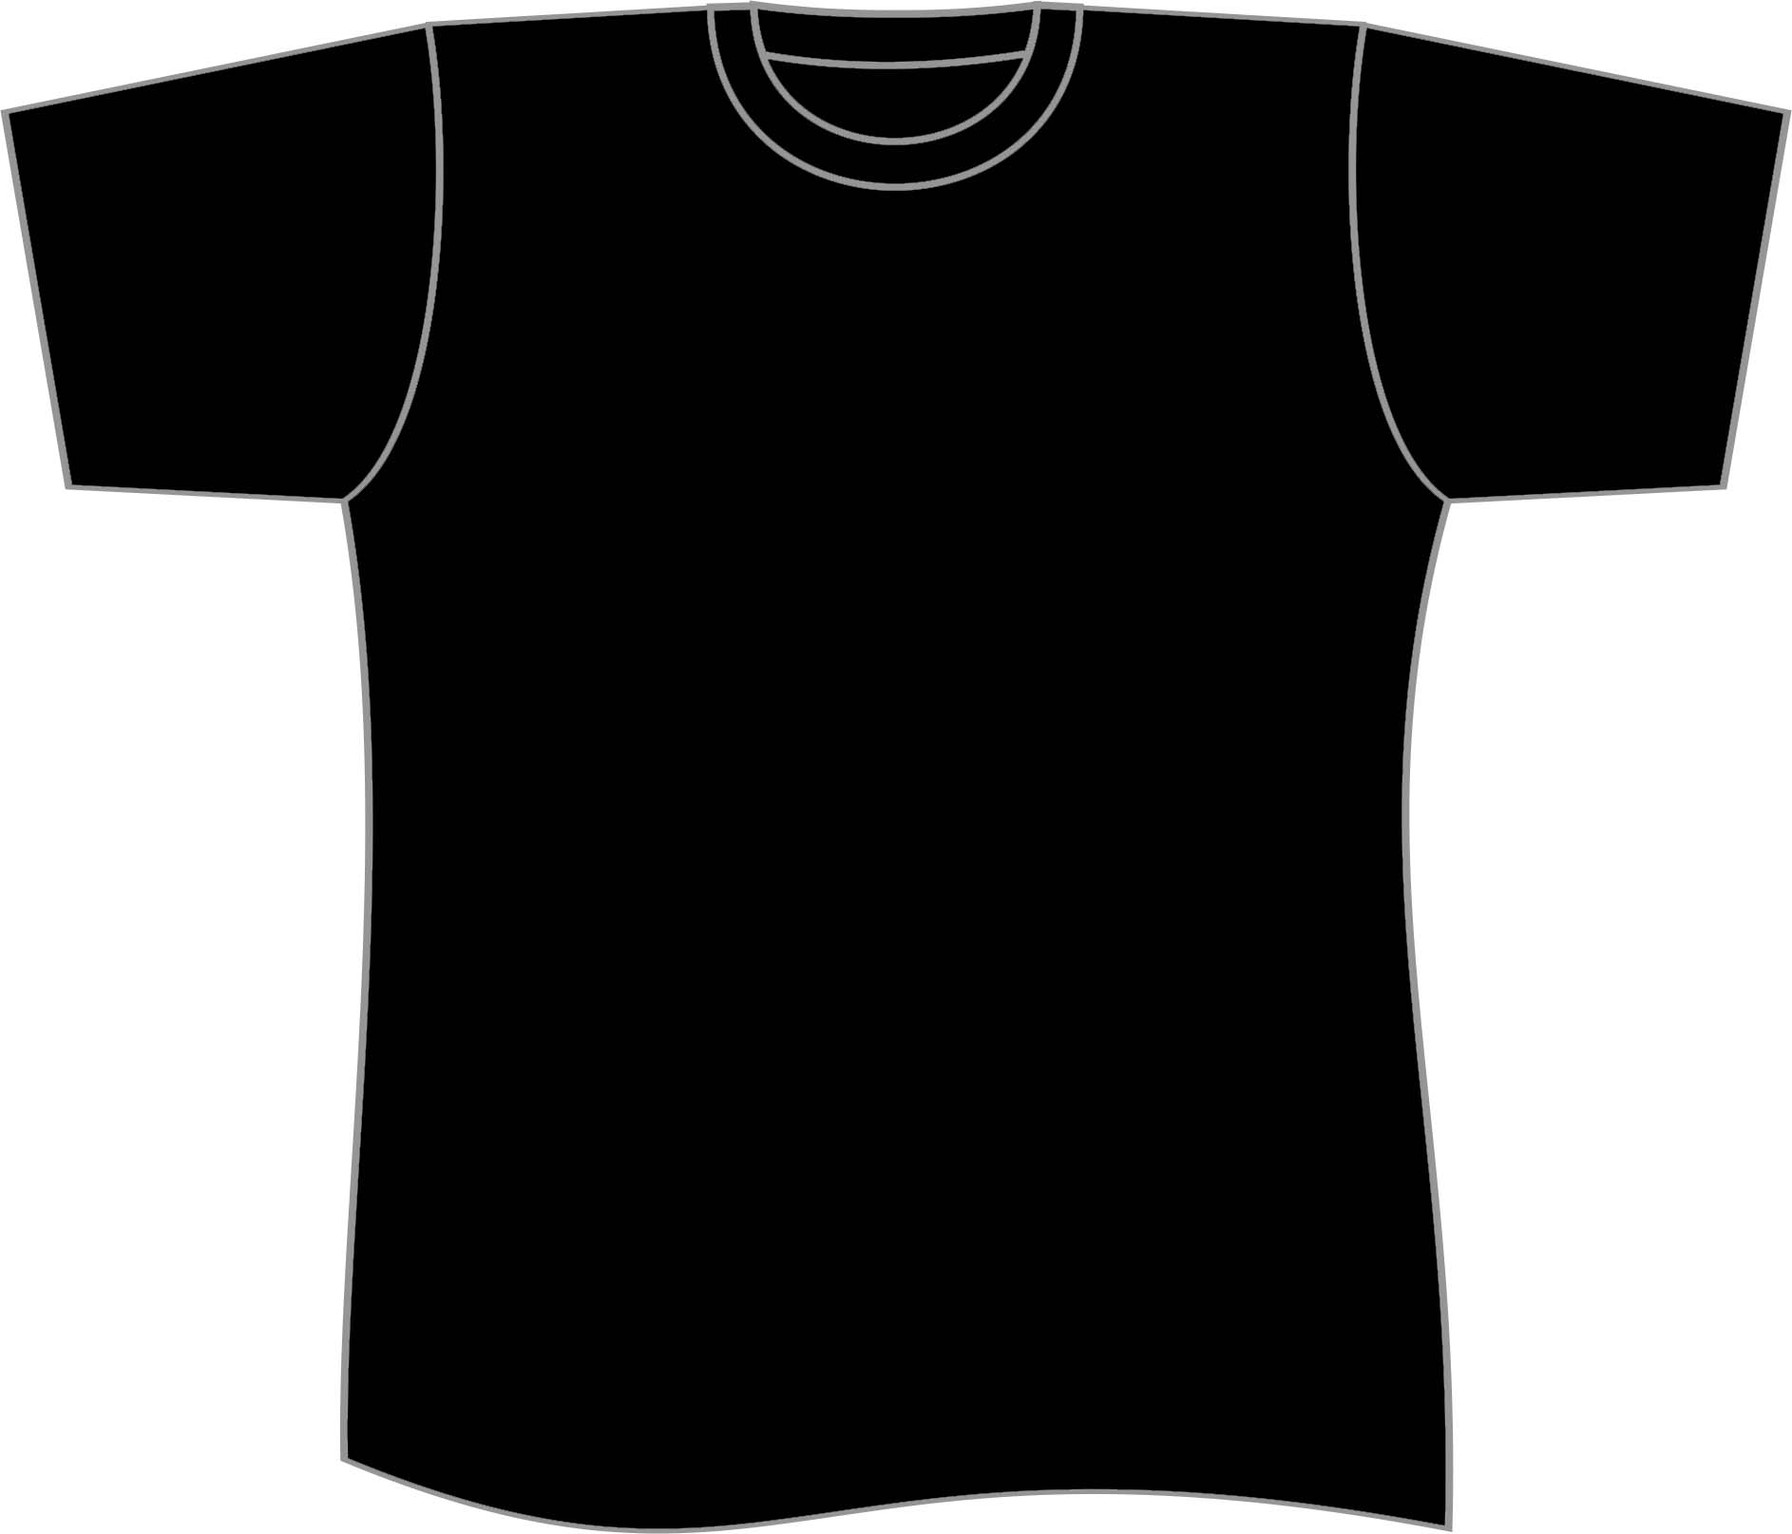 T-shirt girl shirt template clipart pertaining to - Cliparting.com